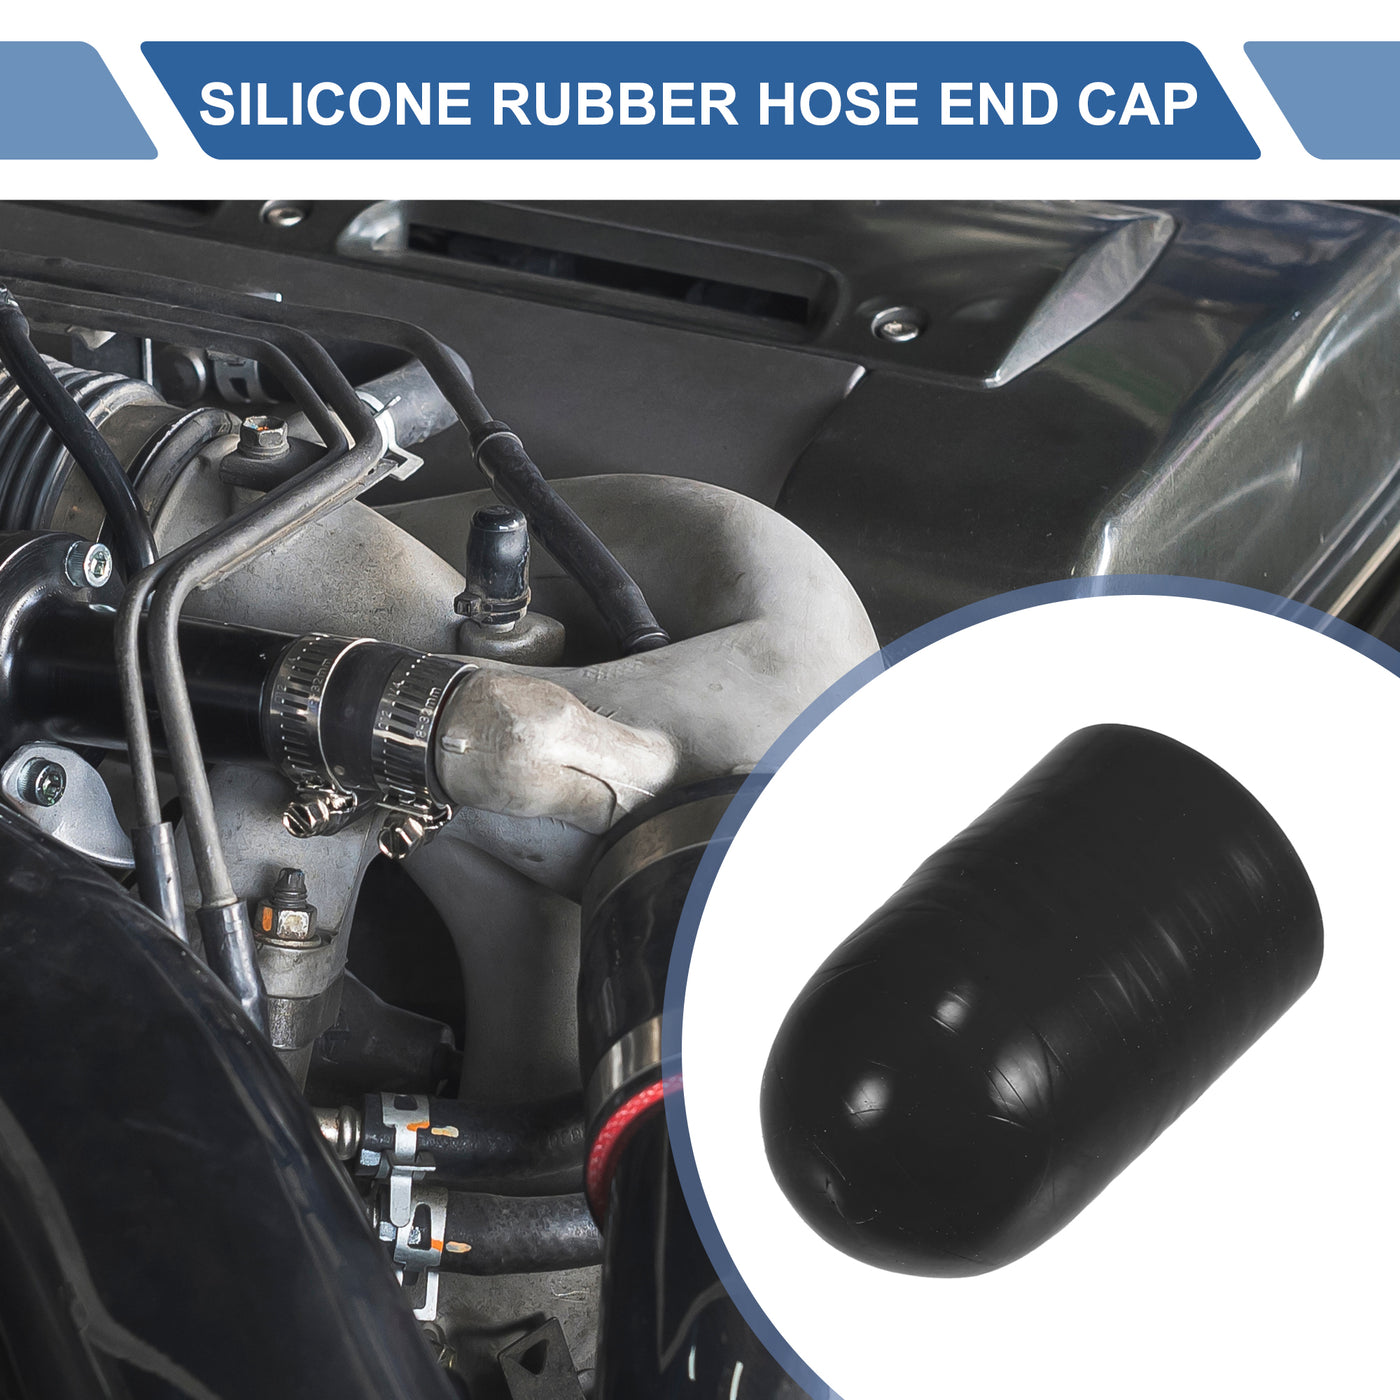 X AUTOHAUX 1 Set 30mm Length 20mm/0.79" ID Black Car Silicone Rubber Hose End Cap with Clamps Silicone Reinforced Blanking Cap for Bypass Tube Universal